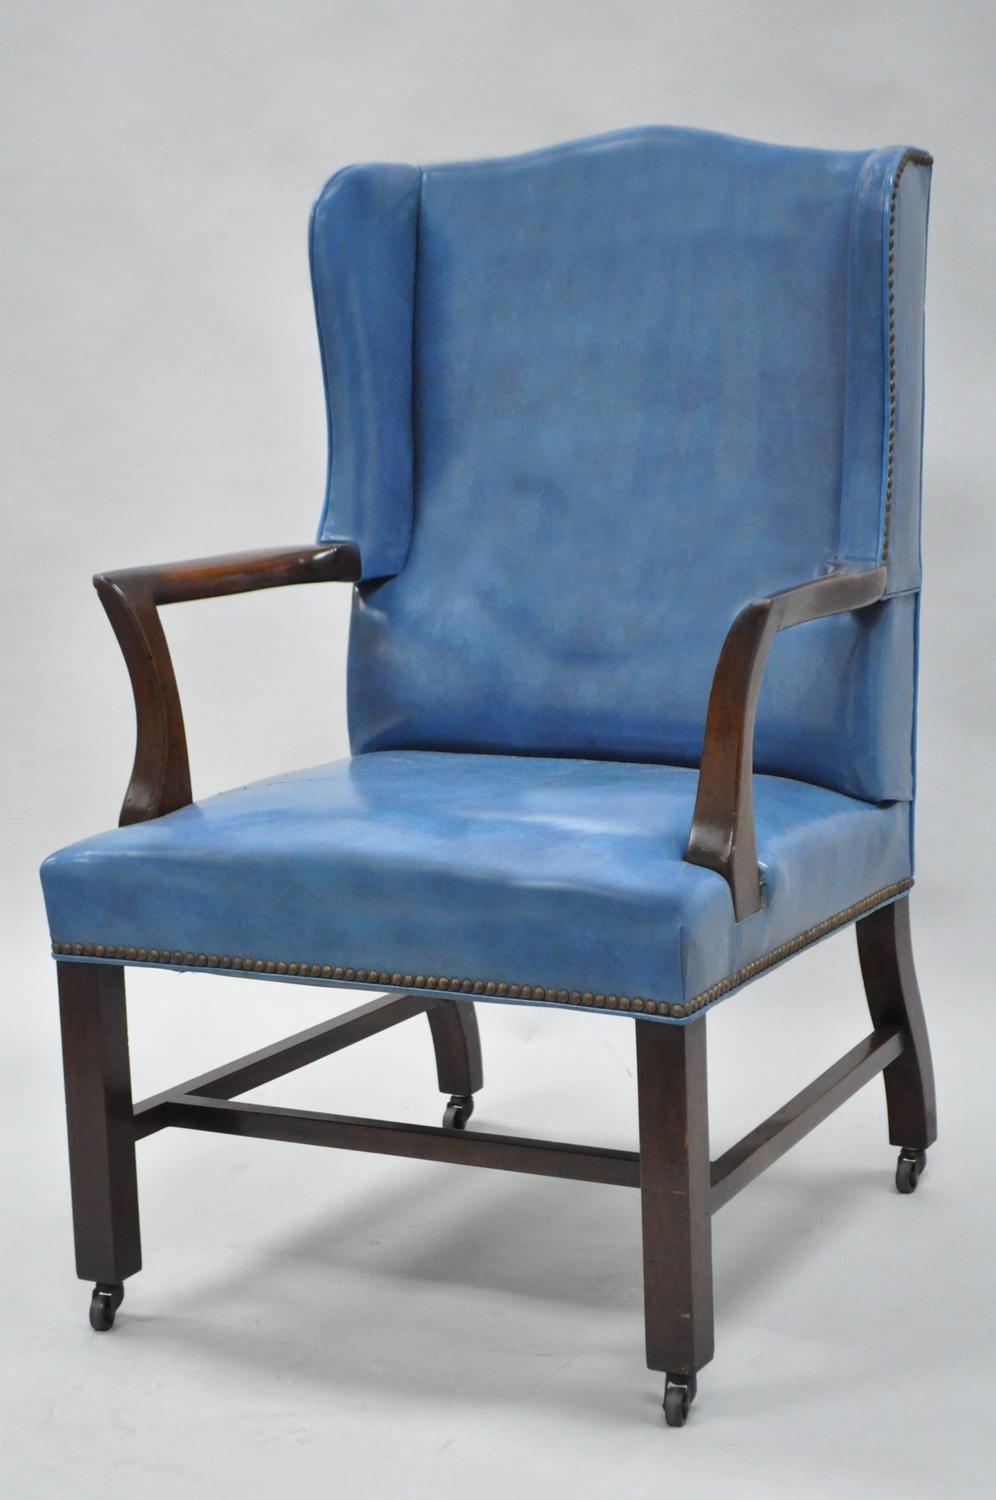 Mid-20th Century Blue Leather Office Desk Chair on Casters ...